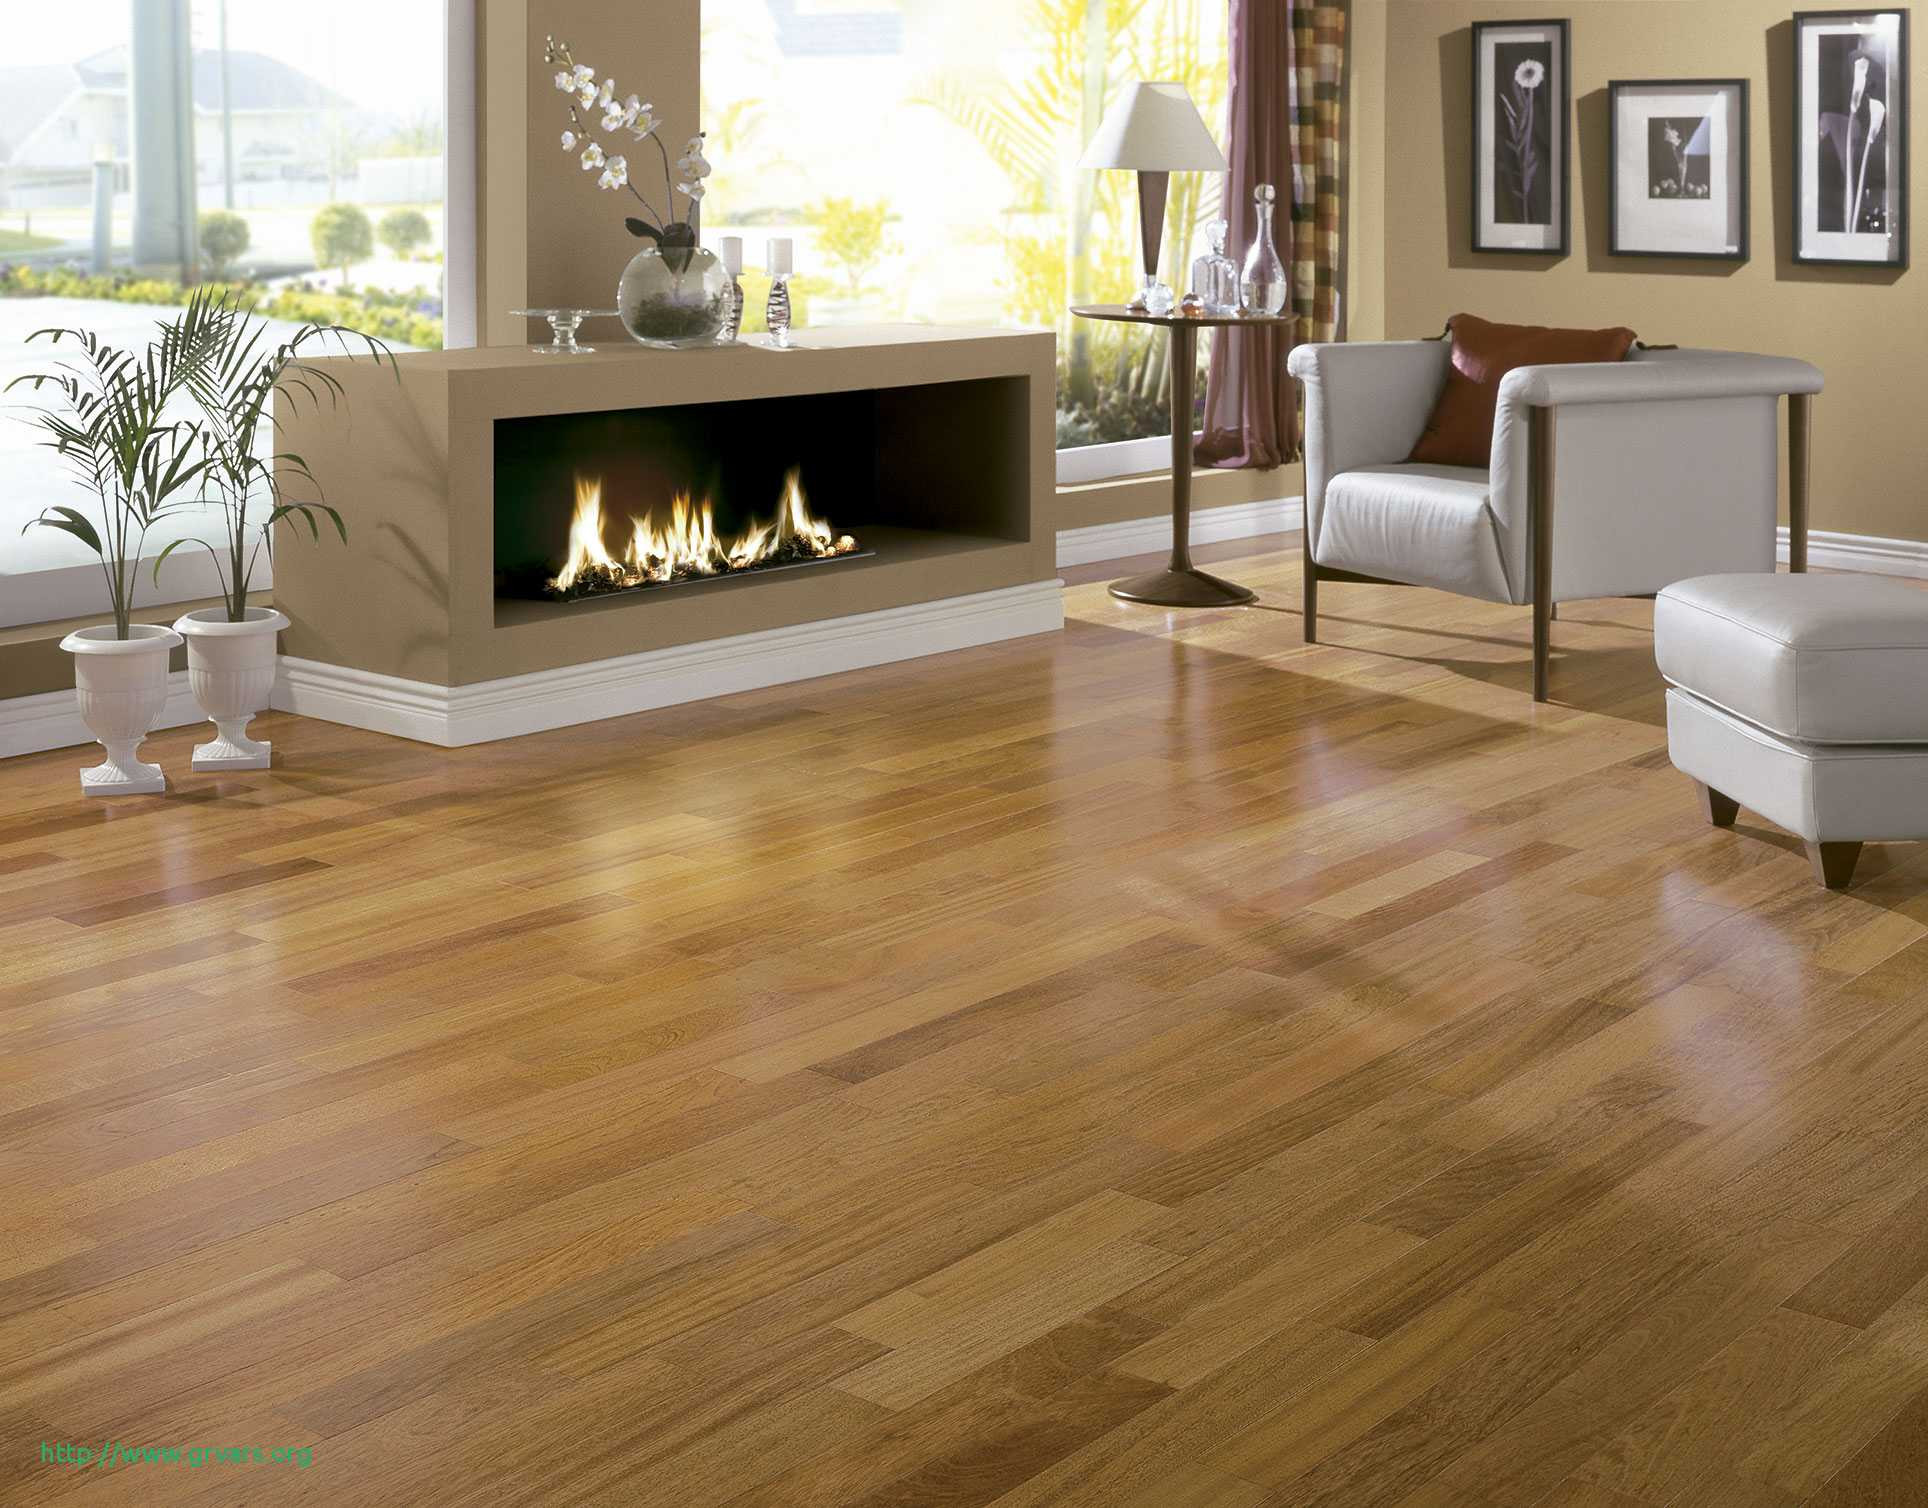 24 attractive Hardwood Floor Cleaning Buffalo Ny 2024 free download hardwood floor cleaning buffalo ny of 21 ac289lagant flooring stores in st louis mo ideas blog inside full size of bedroom cute discount hardwood flooring 6 brazilian cherry 1920x1508 discou